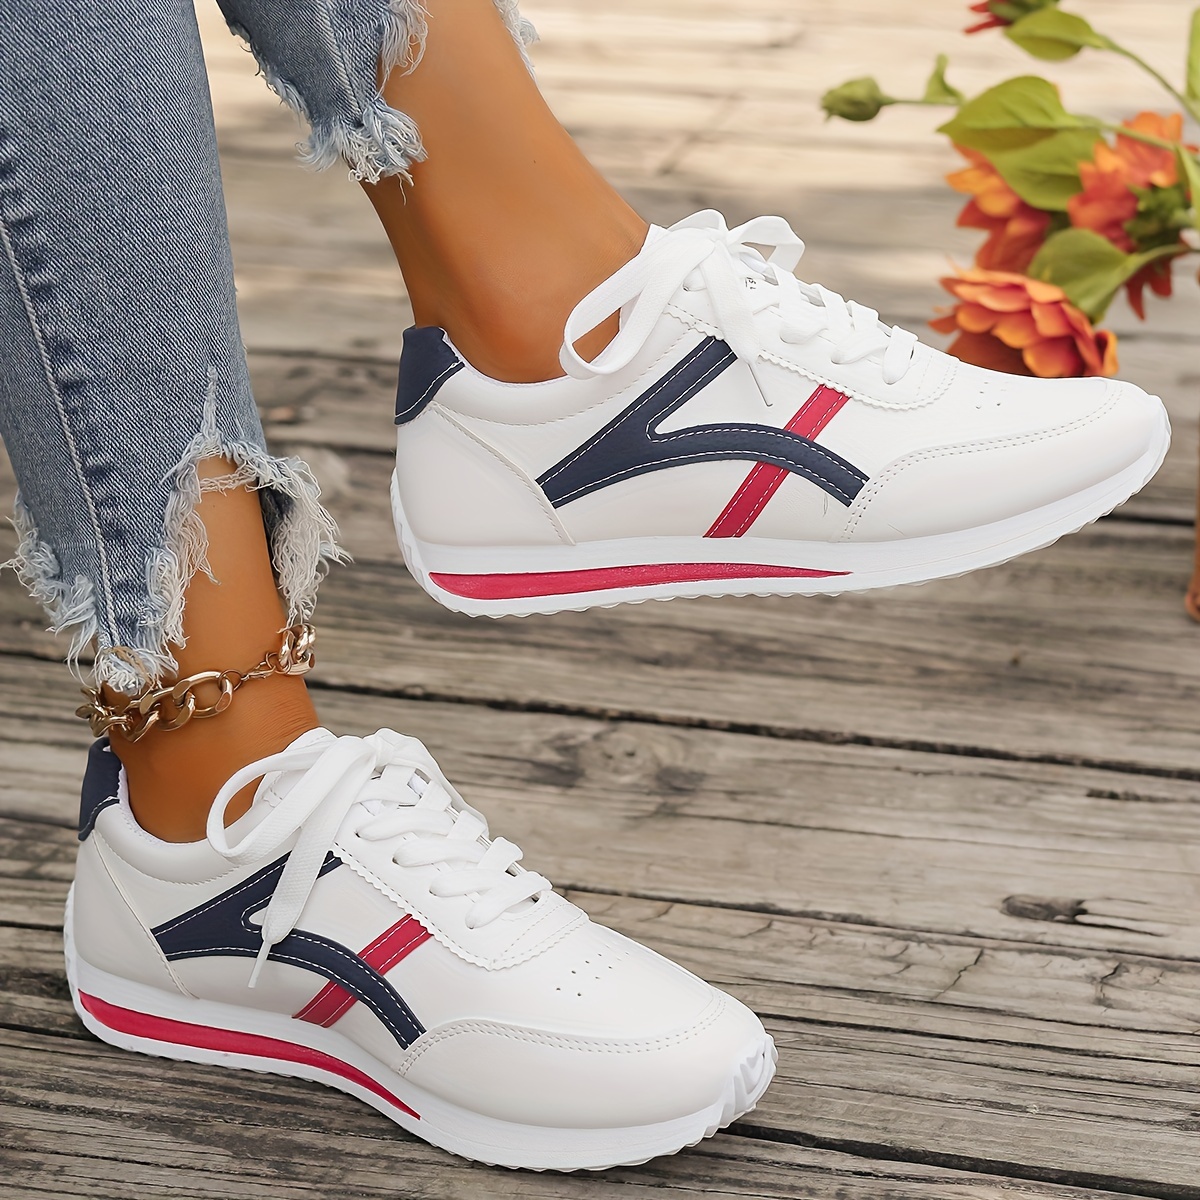 

Women's Classic Fashion Sneakers, White Casual Sports Running Shoes With Red And Navy Accents, Comfortable Flat Soles, Lightweight And Versatile Footwear For Daily Wear